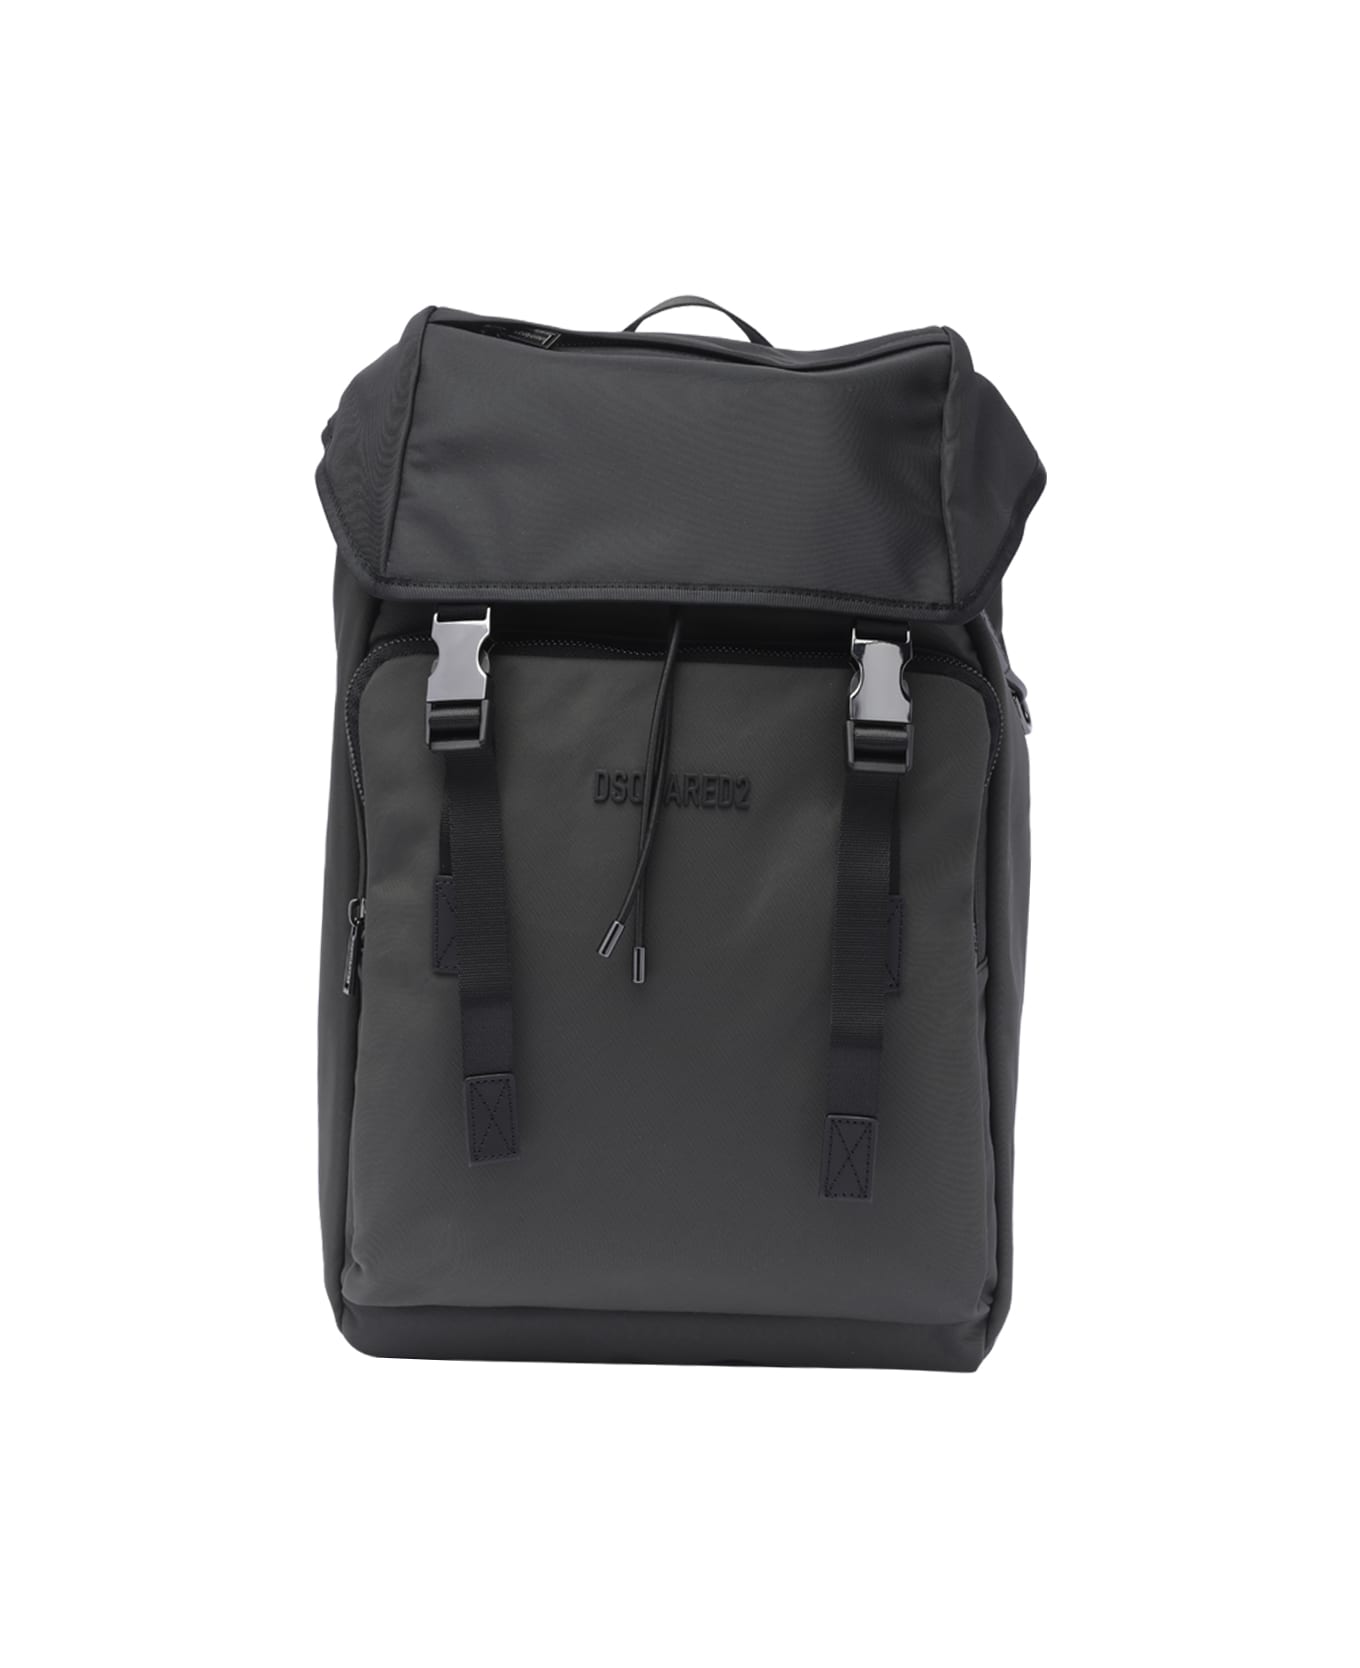 Dsquared2 Backpack With Logo - Grigio Scuro/nero バックパック